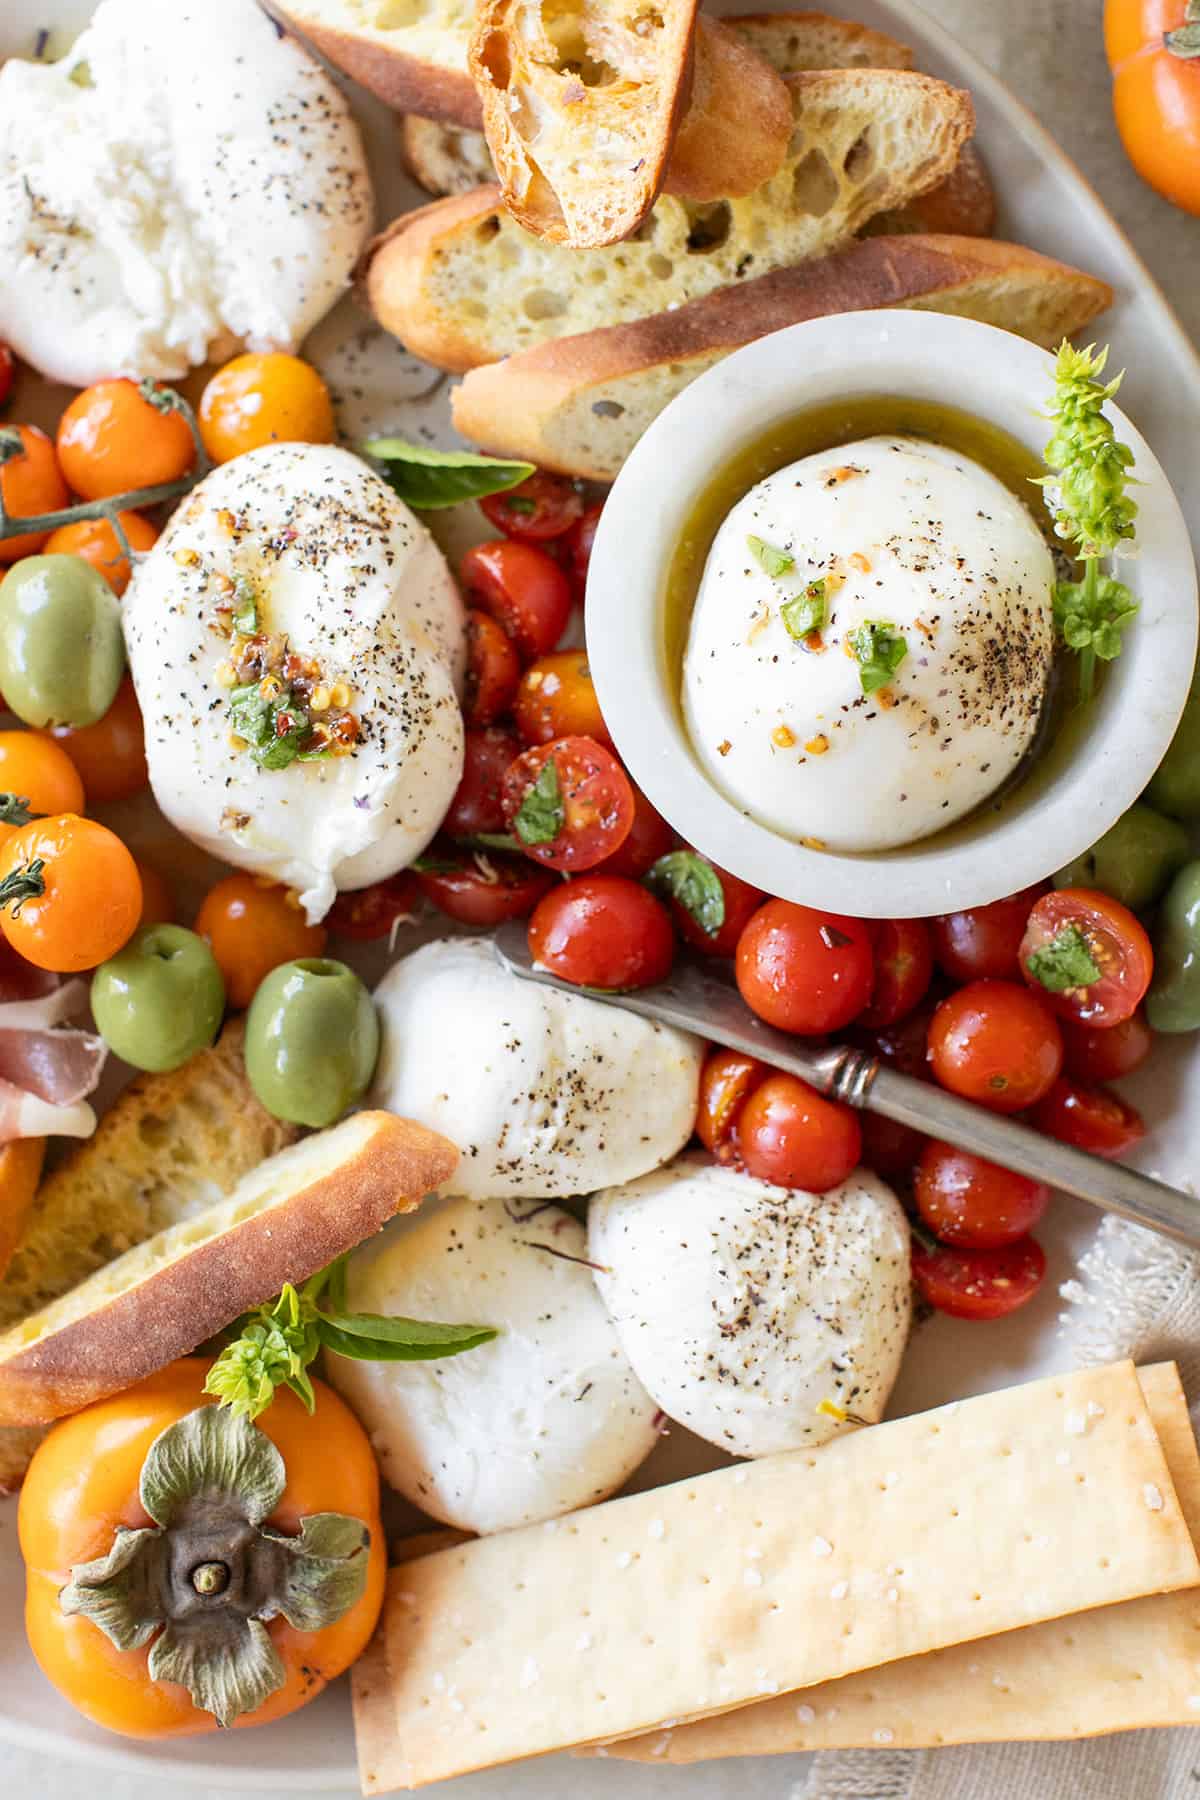 Burrata platter with fresh burrata, crackers, marinated cherry tomatoes, and olives.